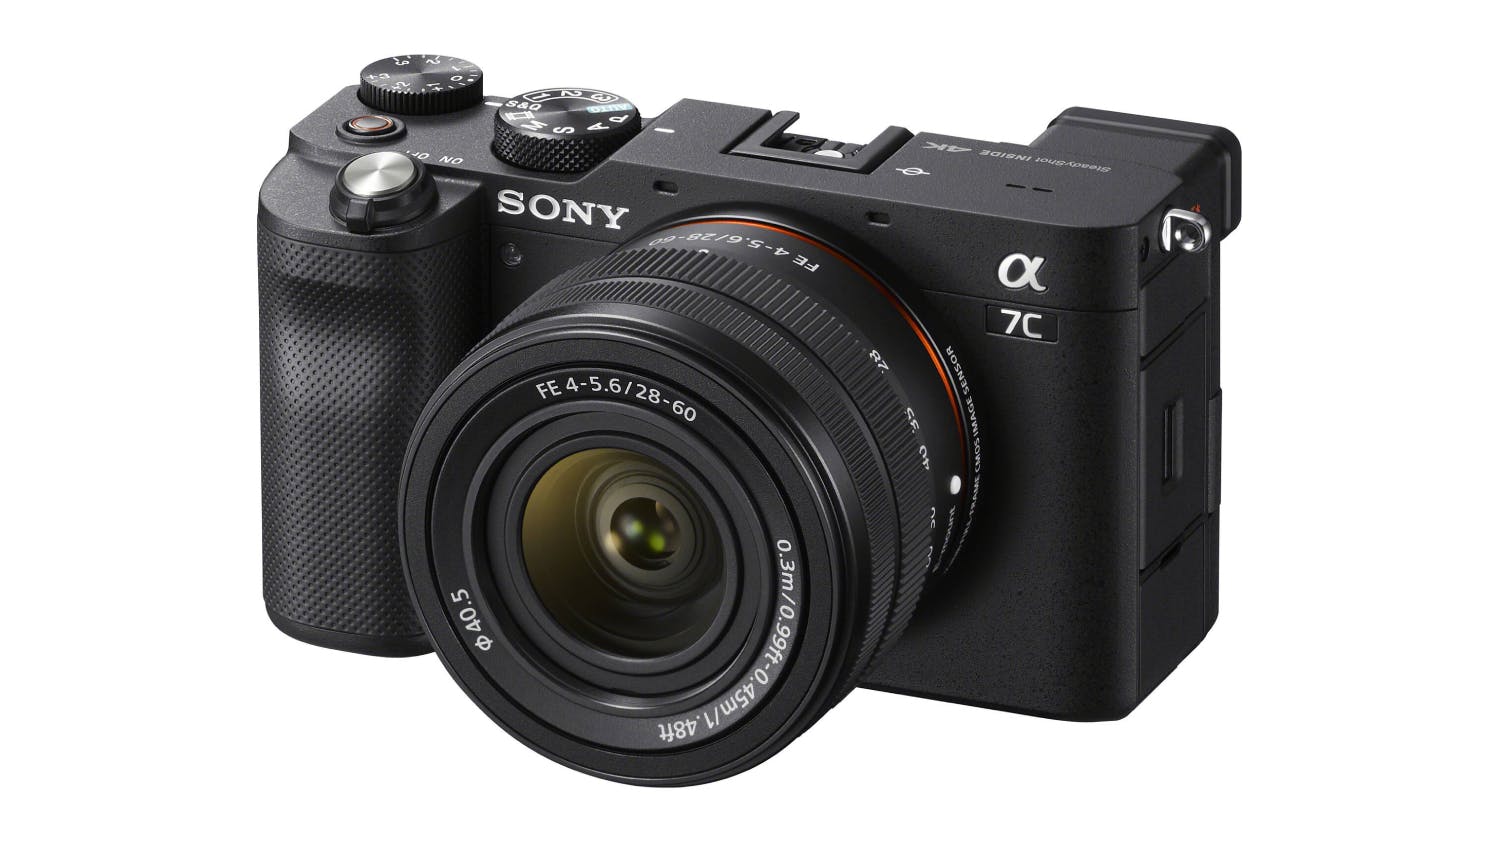 Sony Alpha 7C Full Frame Mirrorless Camera with 28-60mm f/4-5.6 Lens - Silver